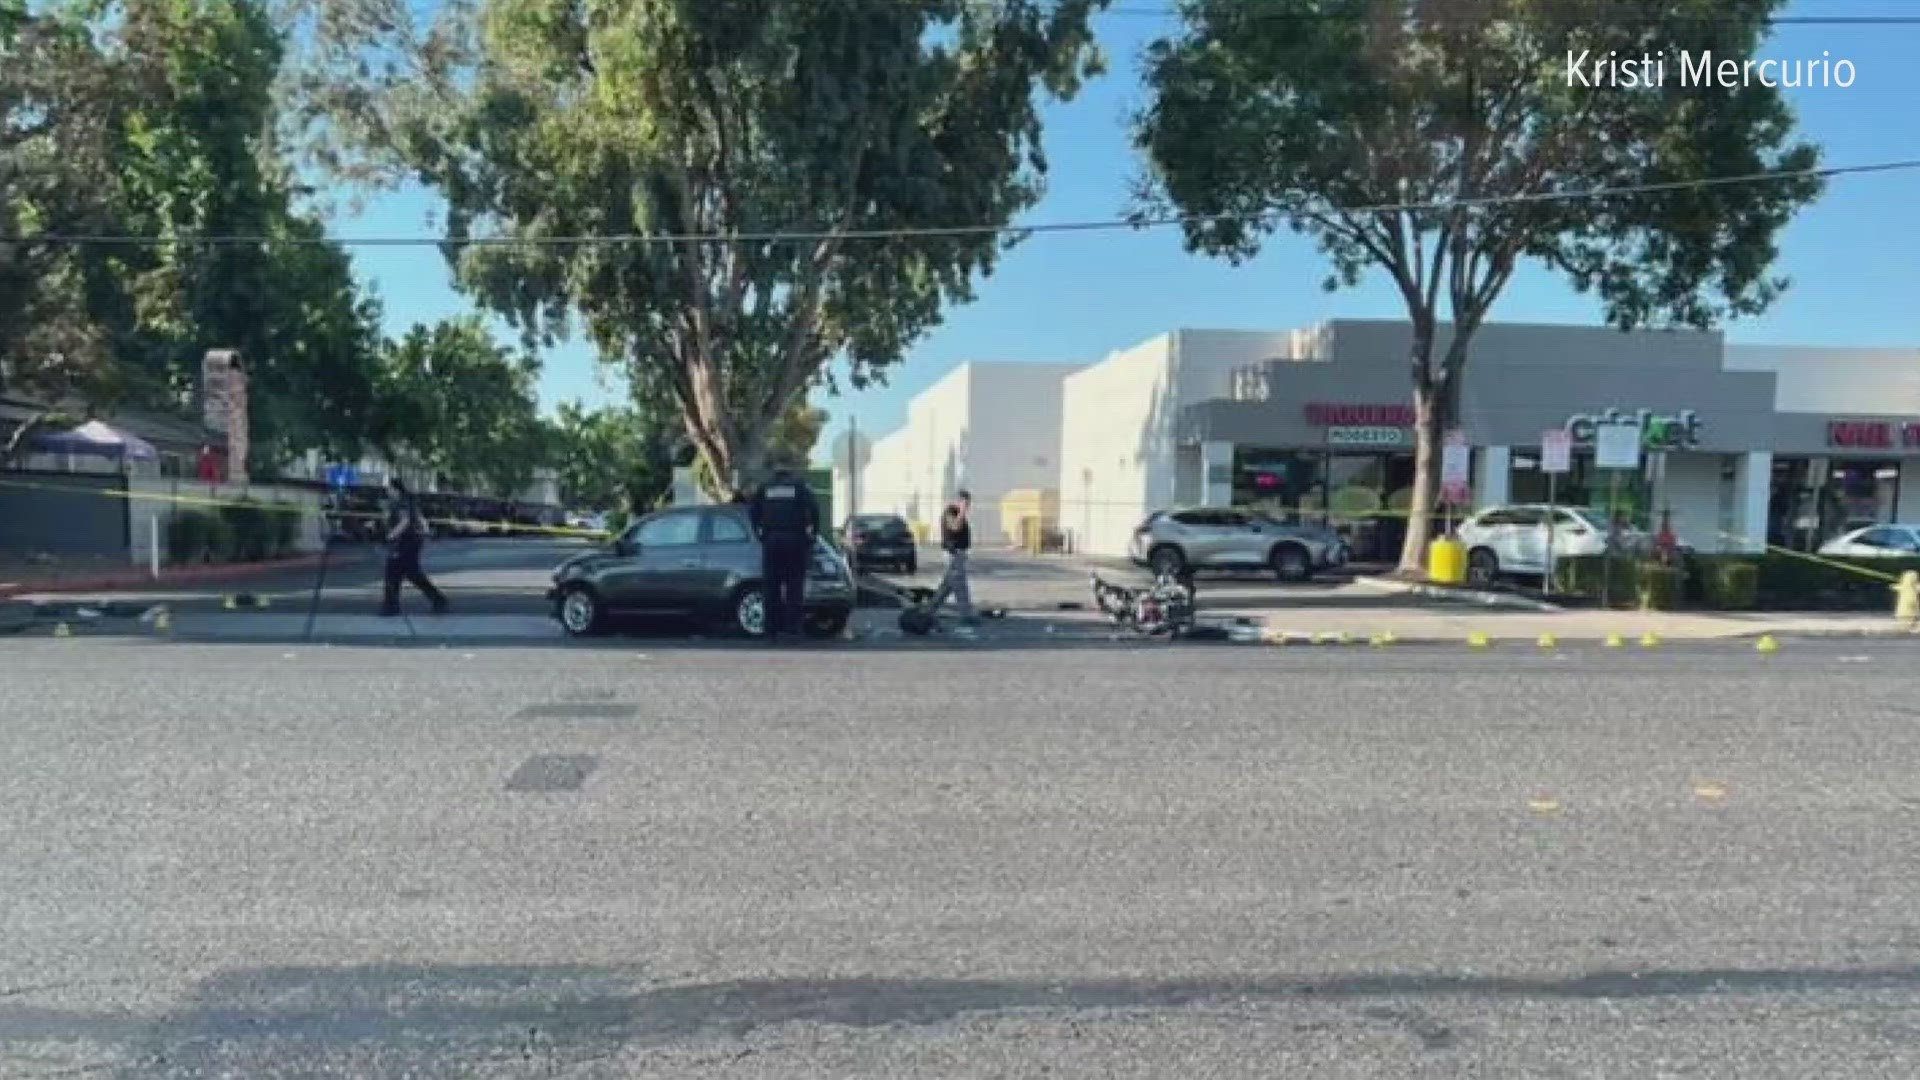 A man is in the hospital after being hit by a car while on a motorcycle in Modesto.